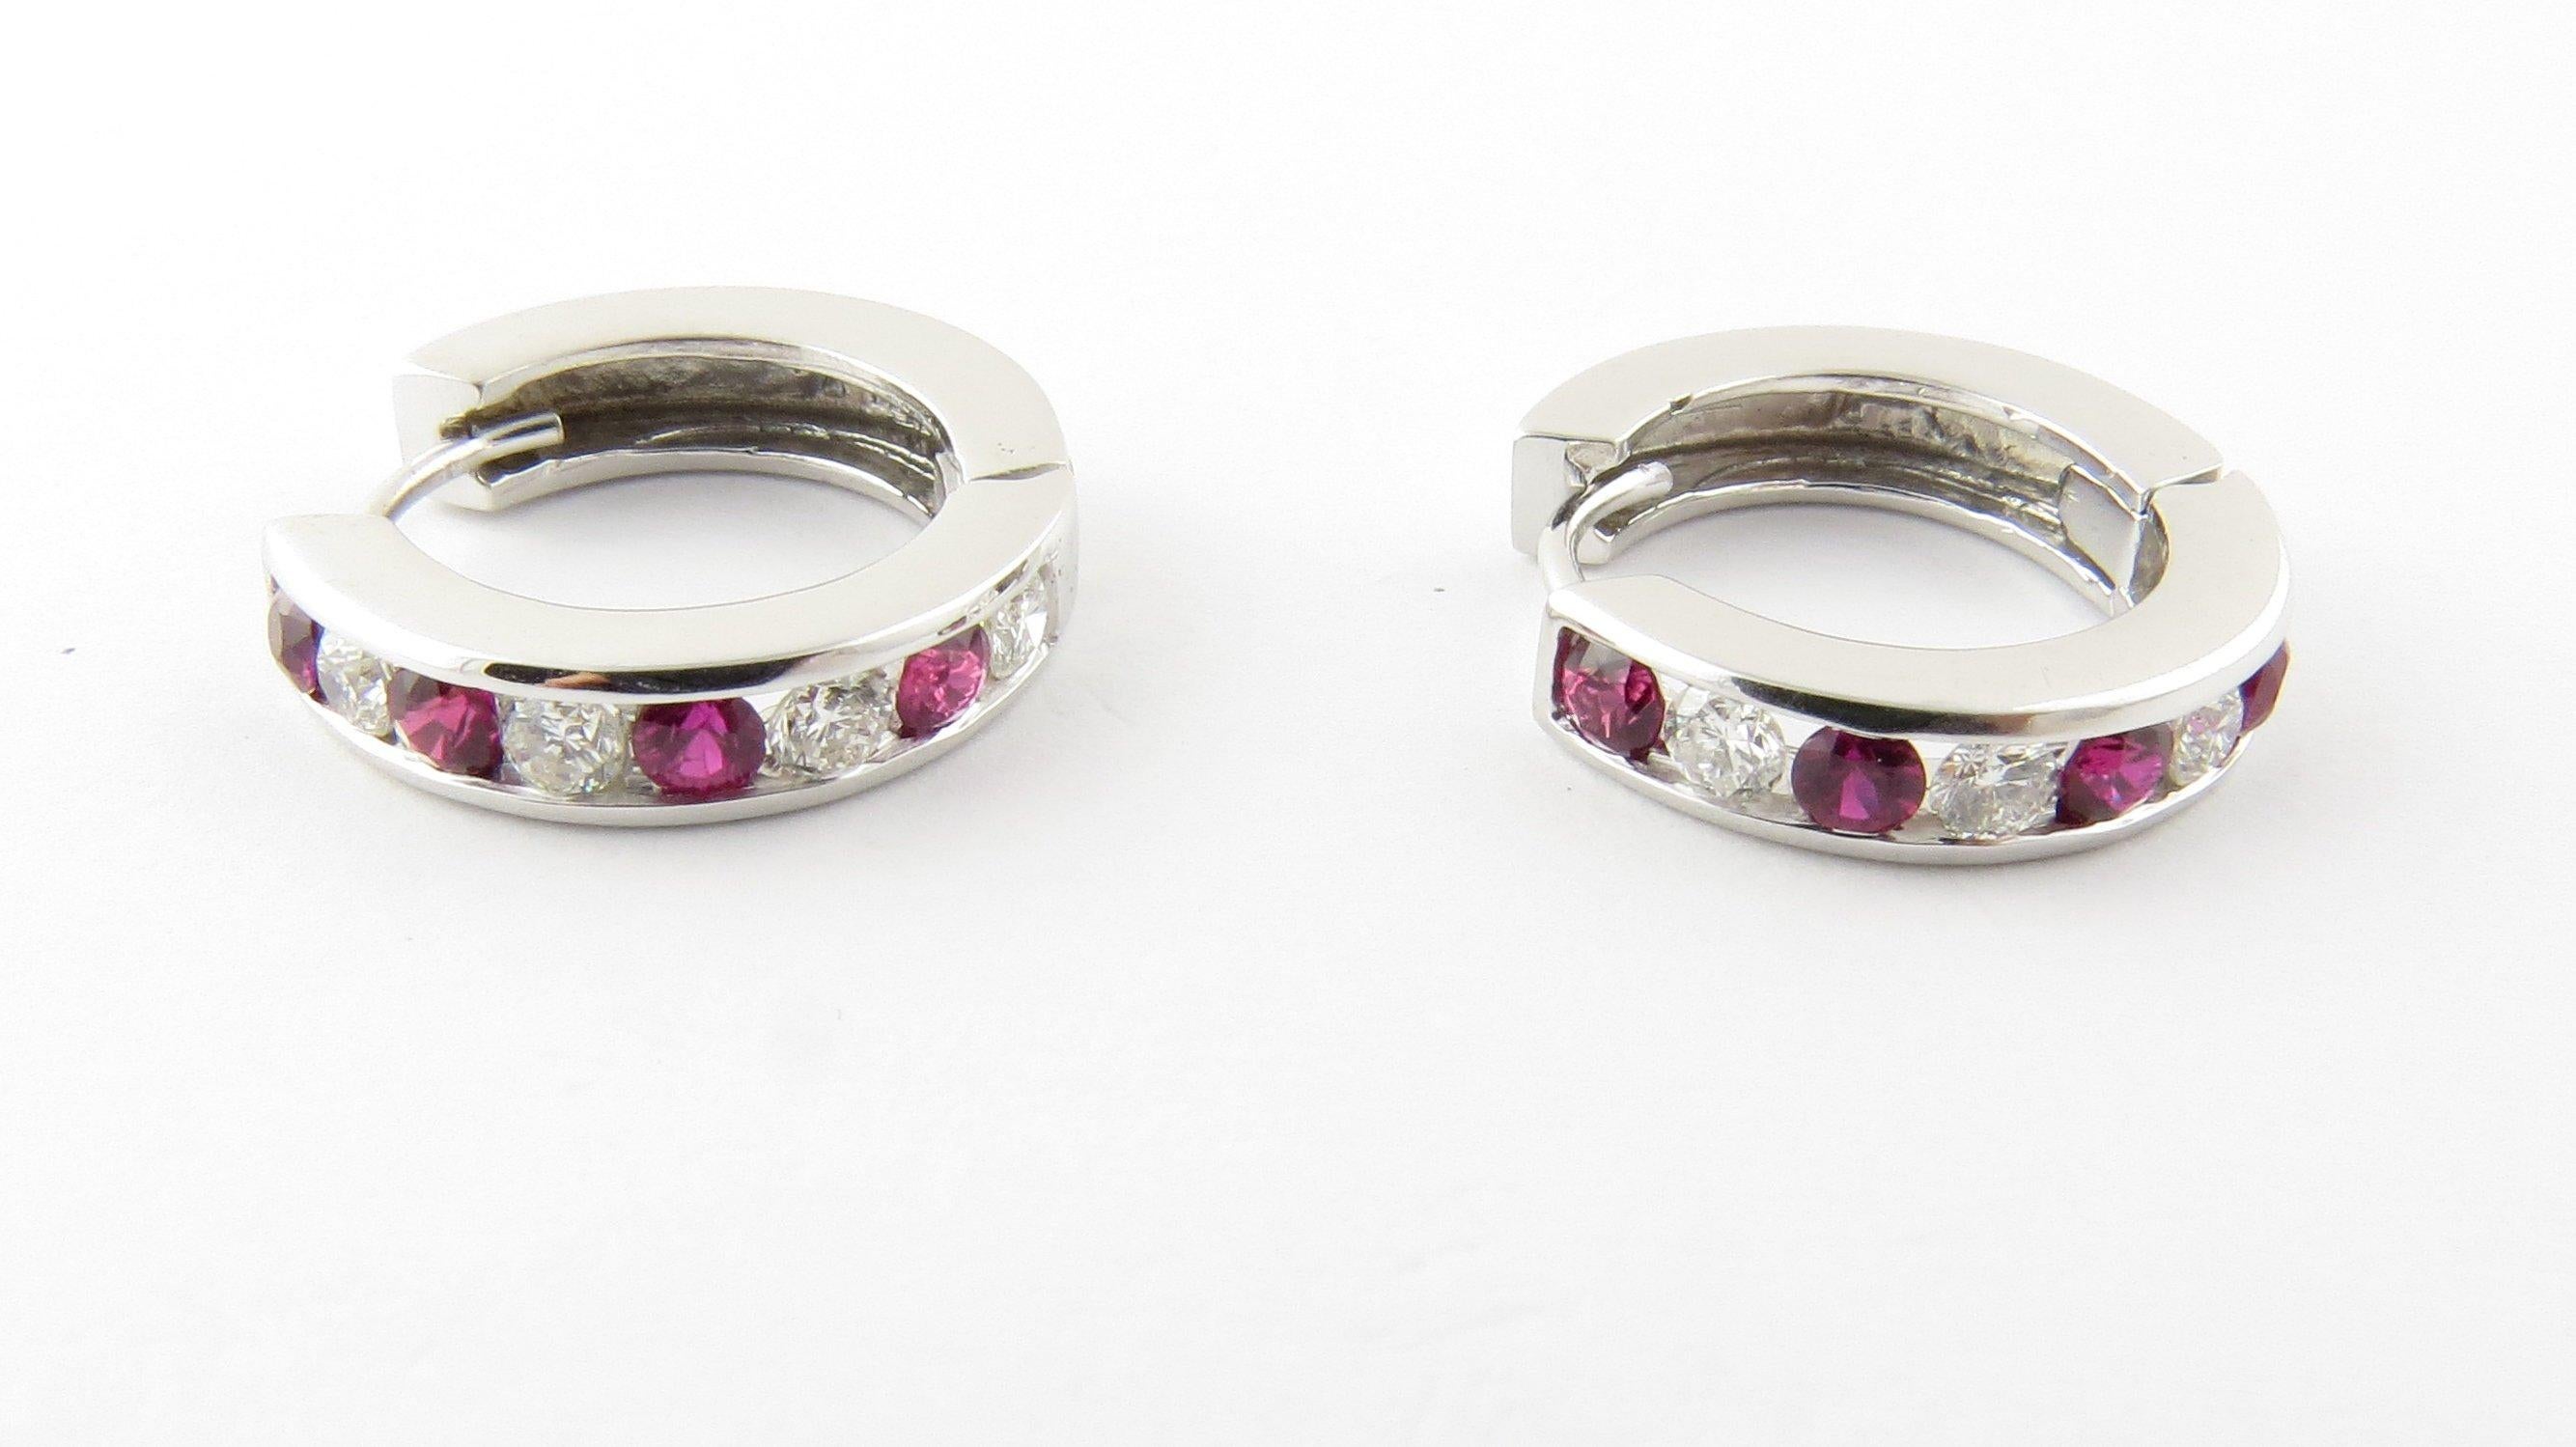 Vintage 14 Karat White Gold Ruby and Diamond Earrings- These lovely earrings each feature four round red rubies and four round brilliant cut diamonds set in polished 14K white gold. Approximate total diamond weight: .40 ct. Diamond color: G Diamond